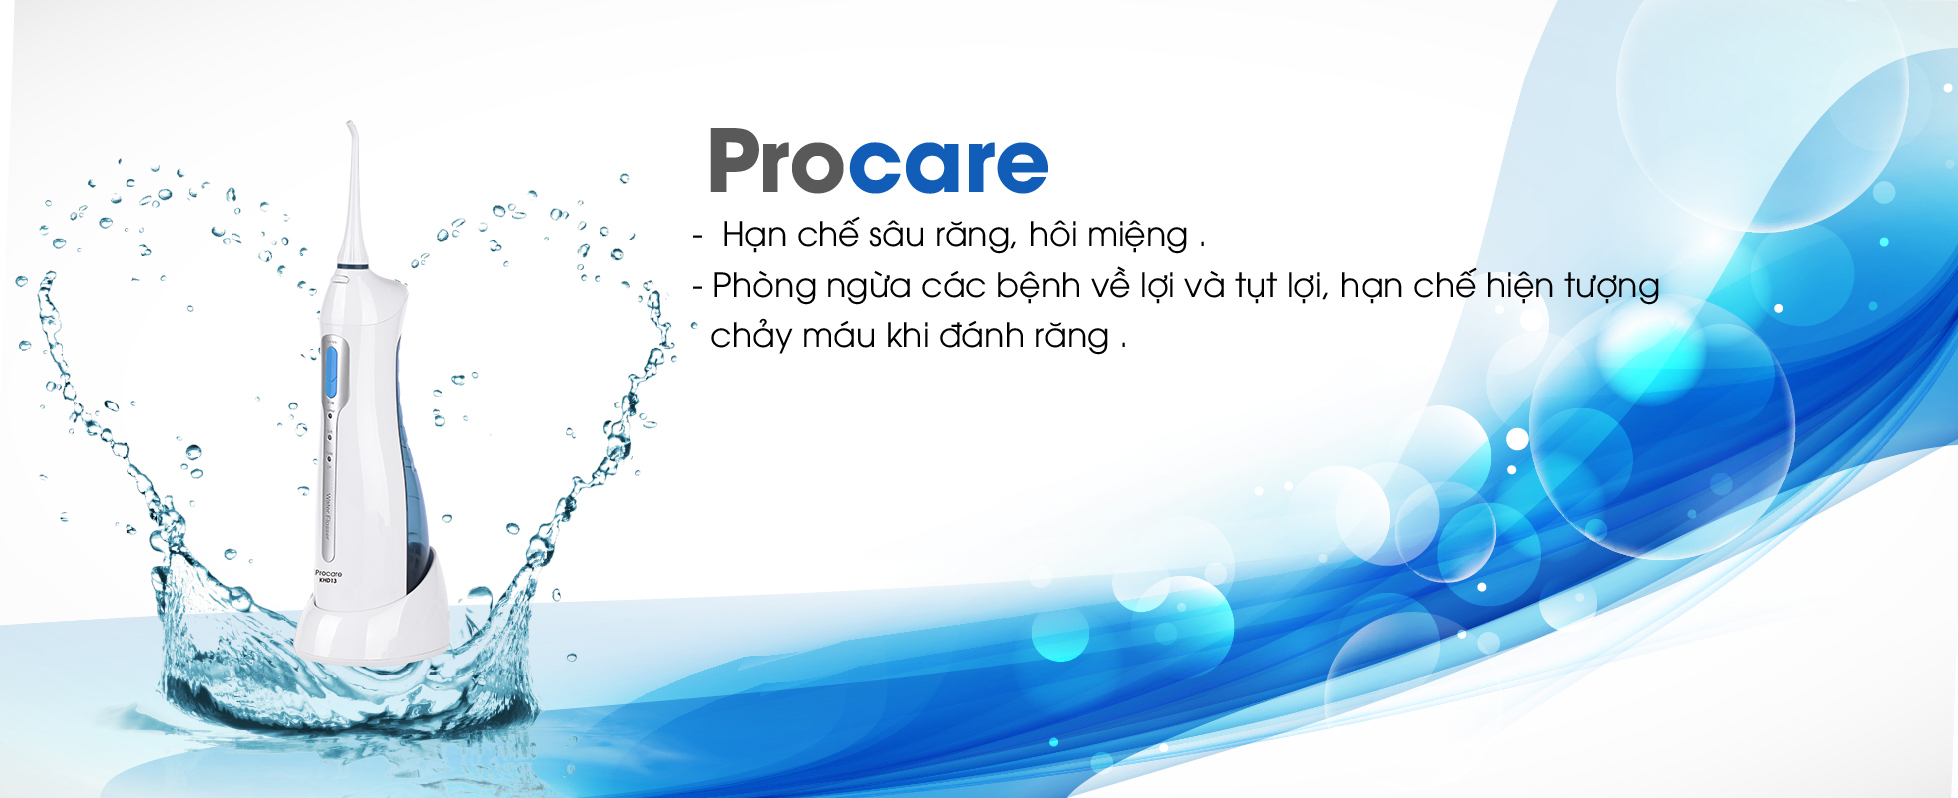 http://procare.asia/may-tam-nuoc-du-lich-khd13